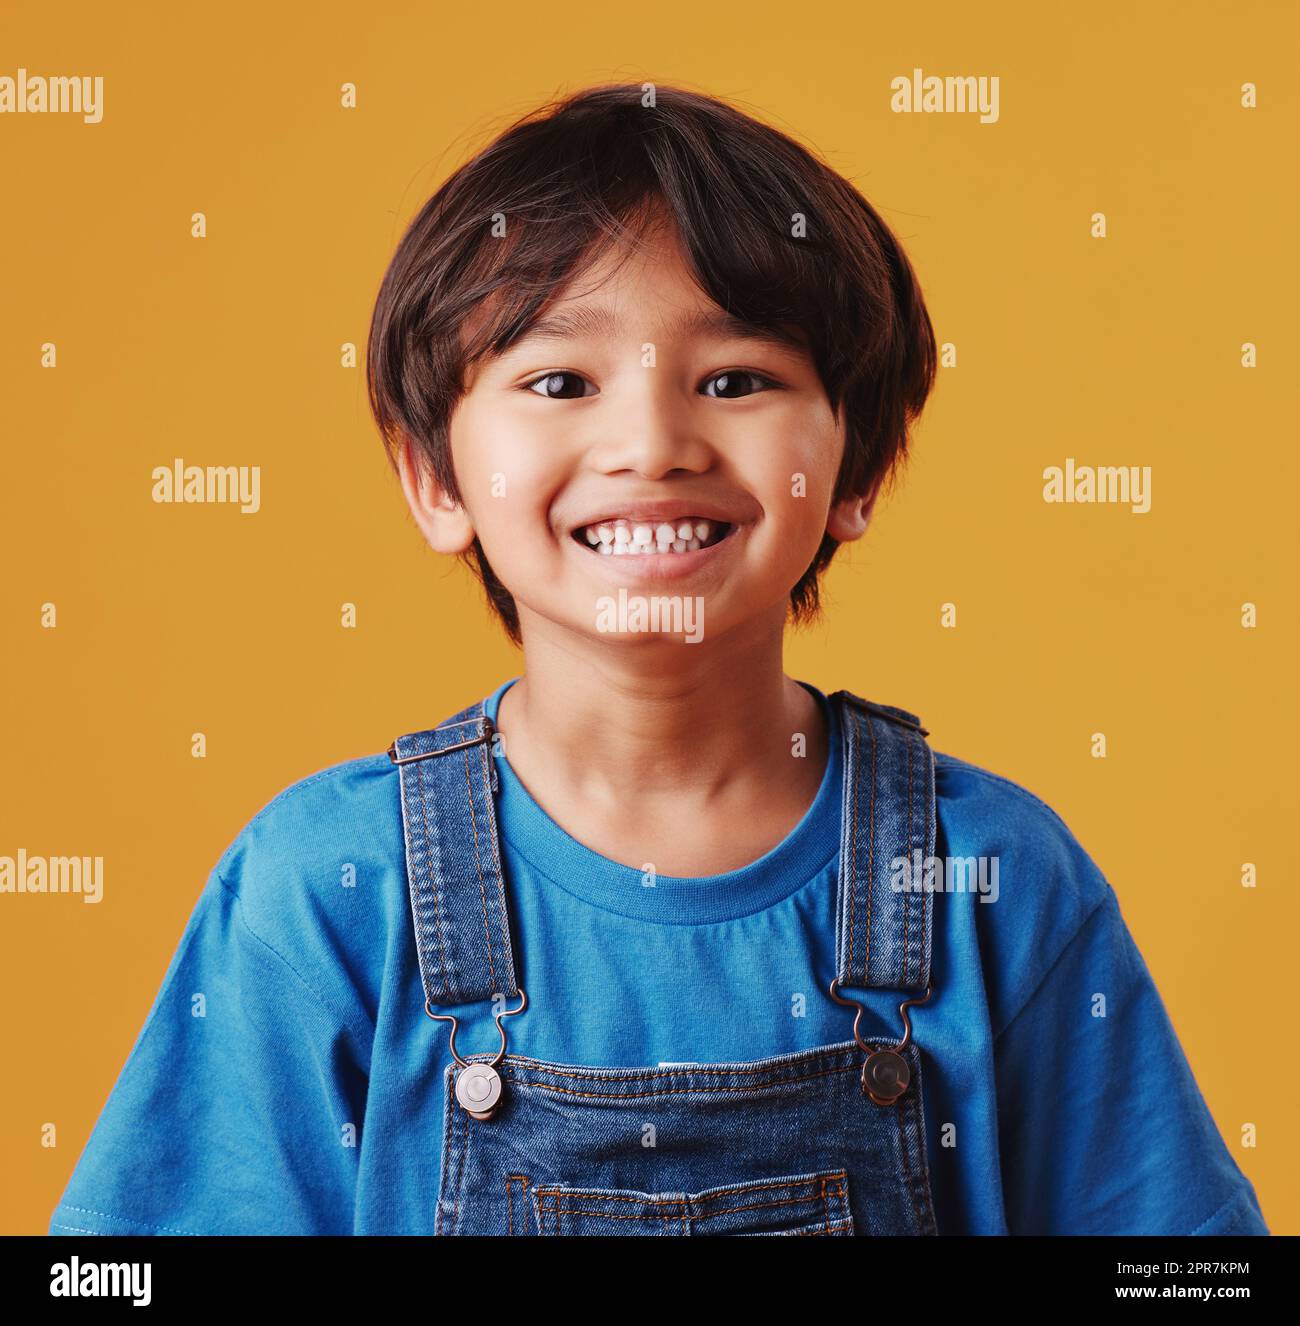 Portrait of a cute little asian boy wearing casual clothes while smiling and looking excited. Child standing against an orange studio background. Adorable happy little boy safe and alone Stock Photo